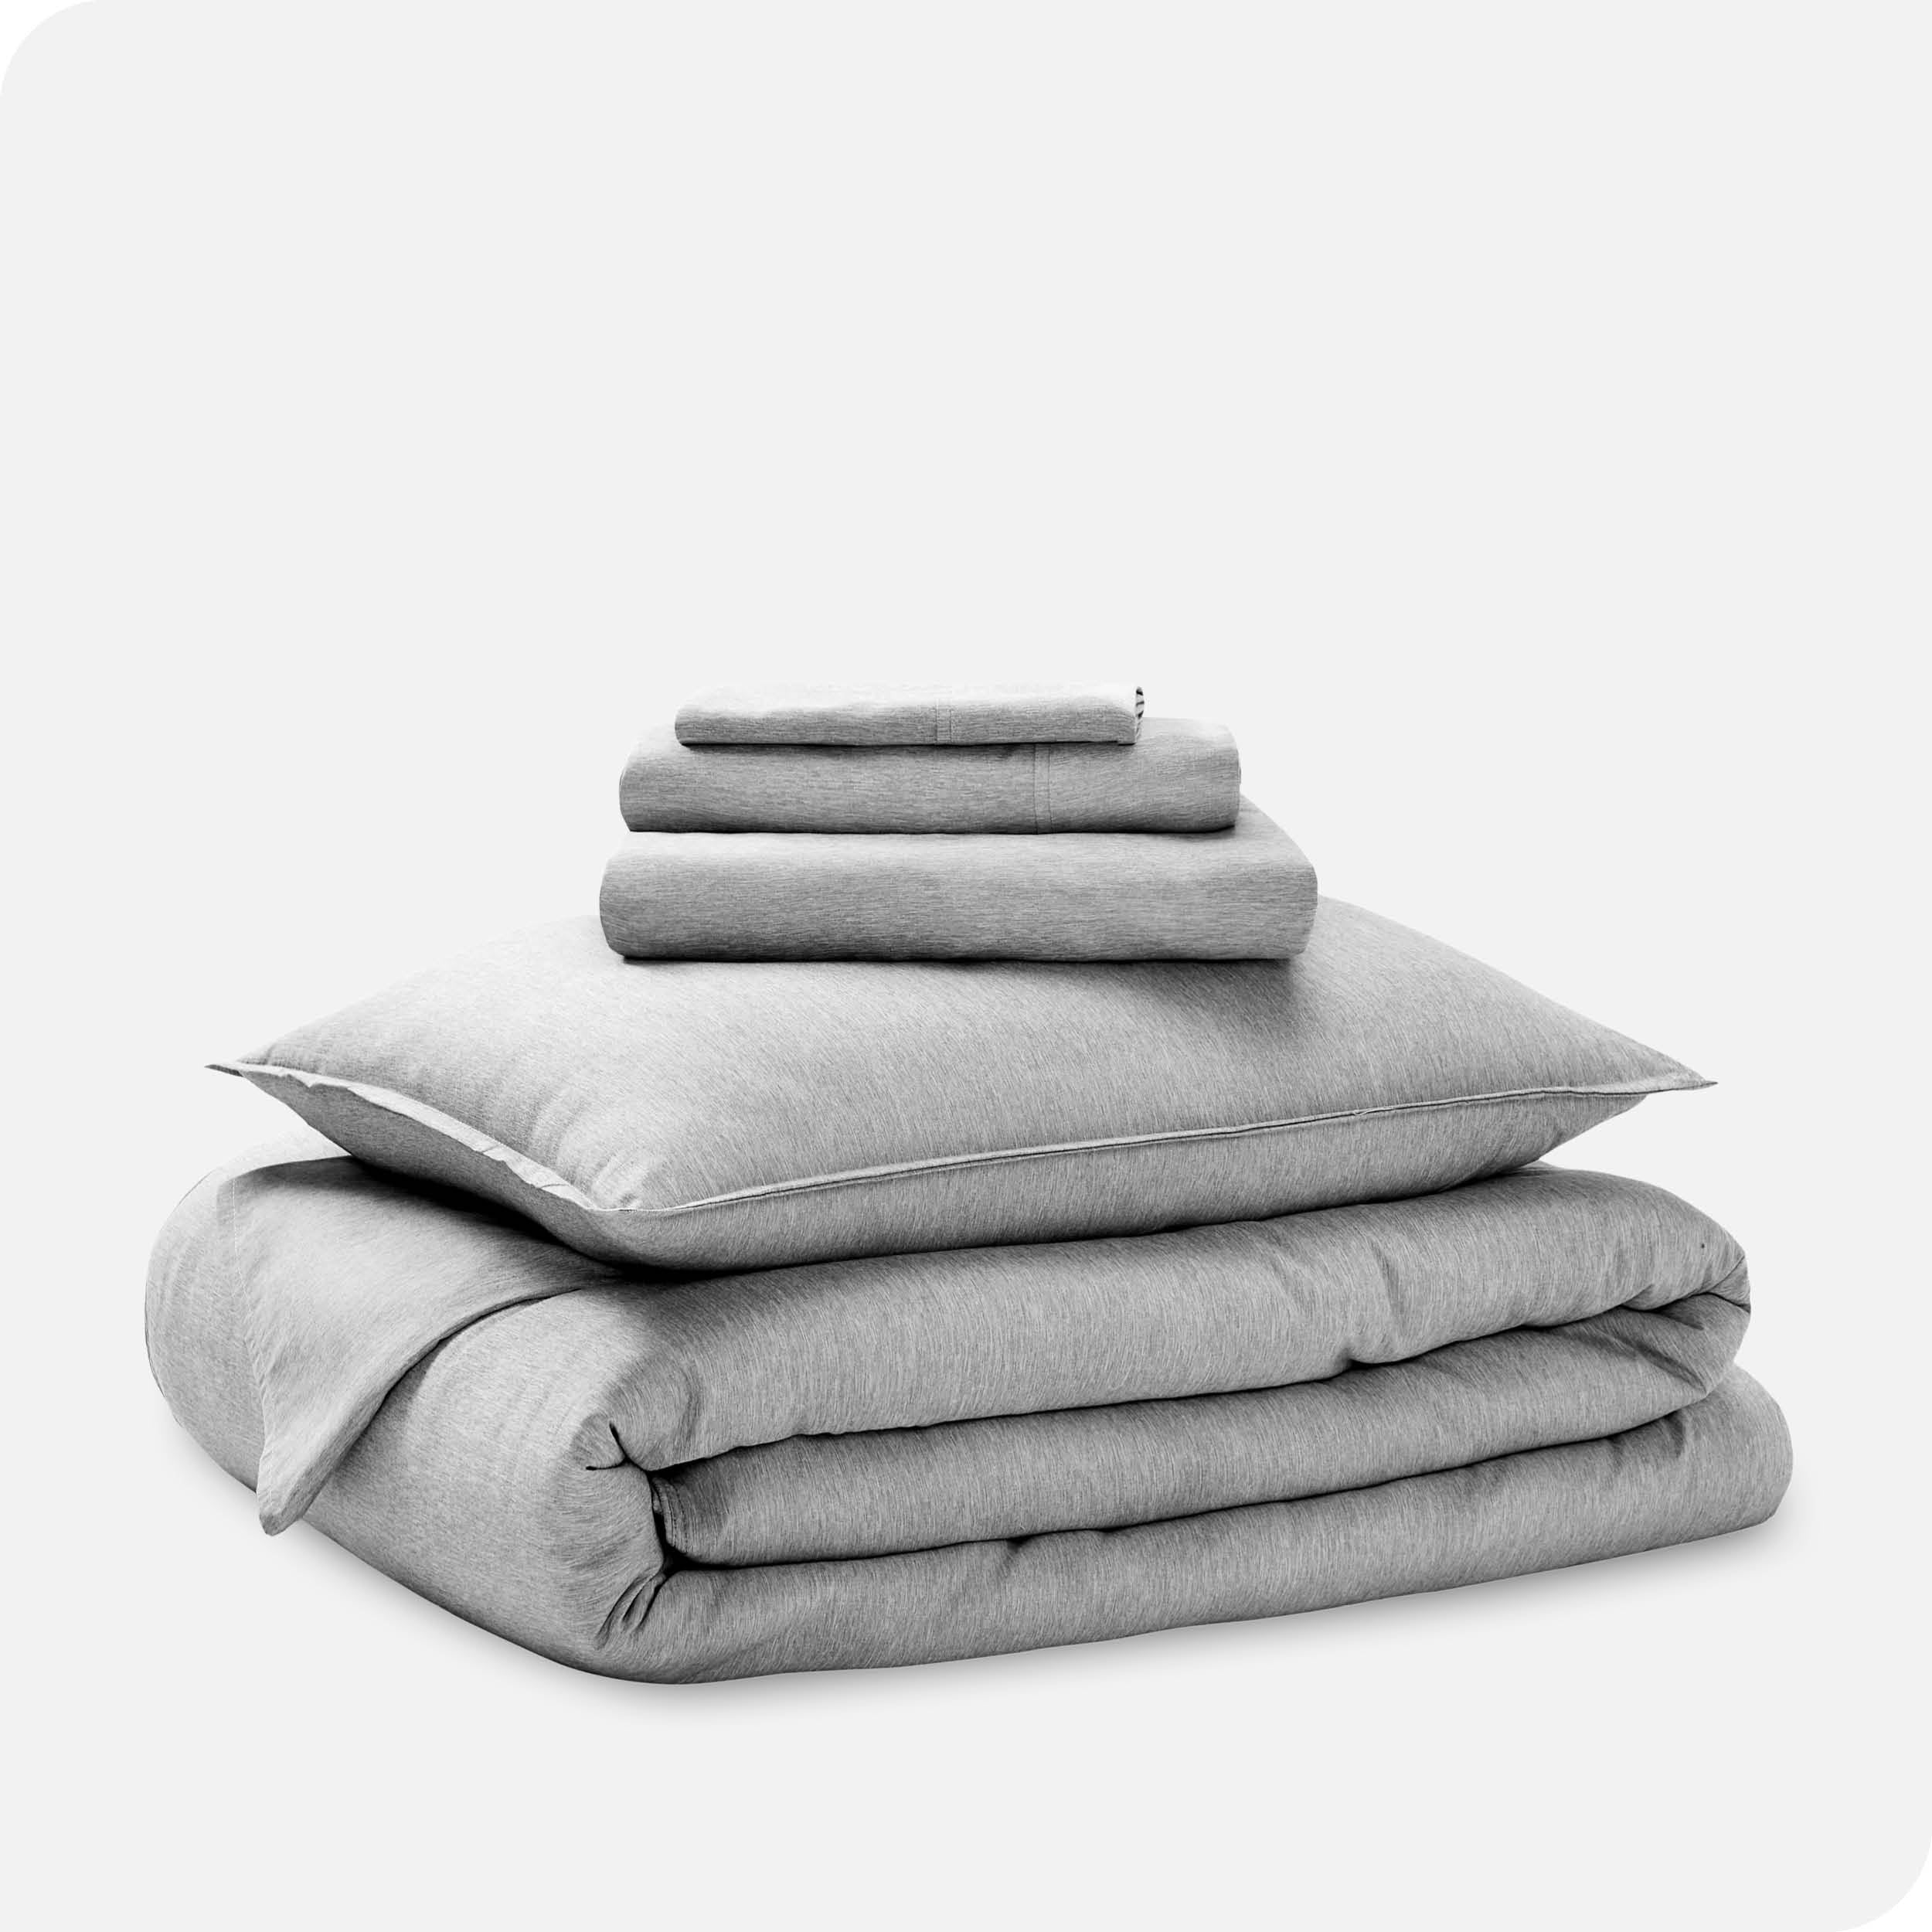 A heathered bedding set folded and stacked.